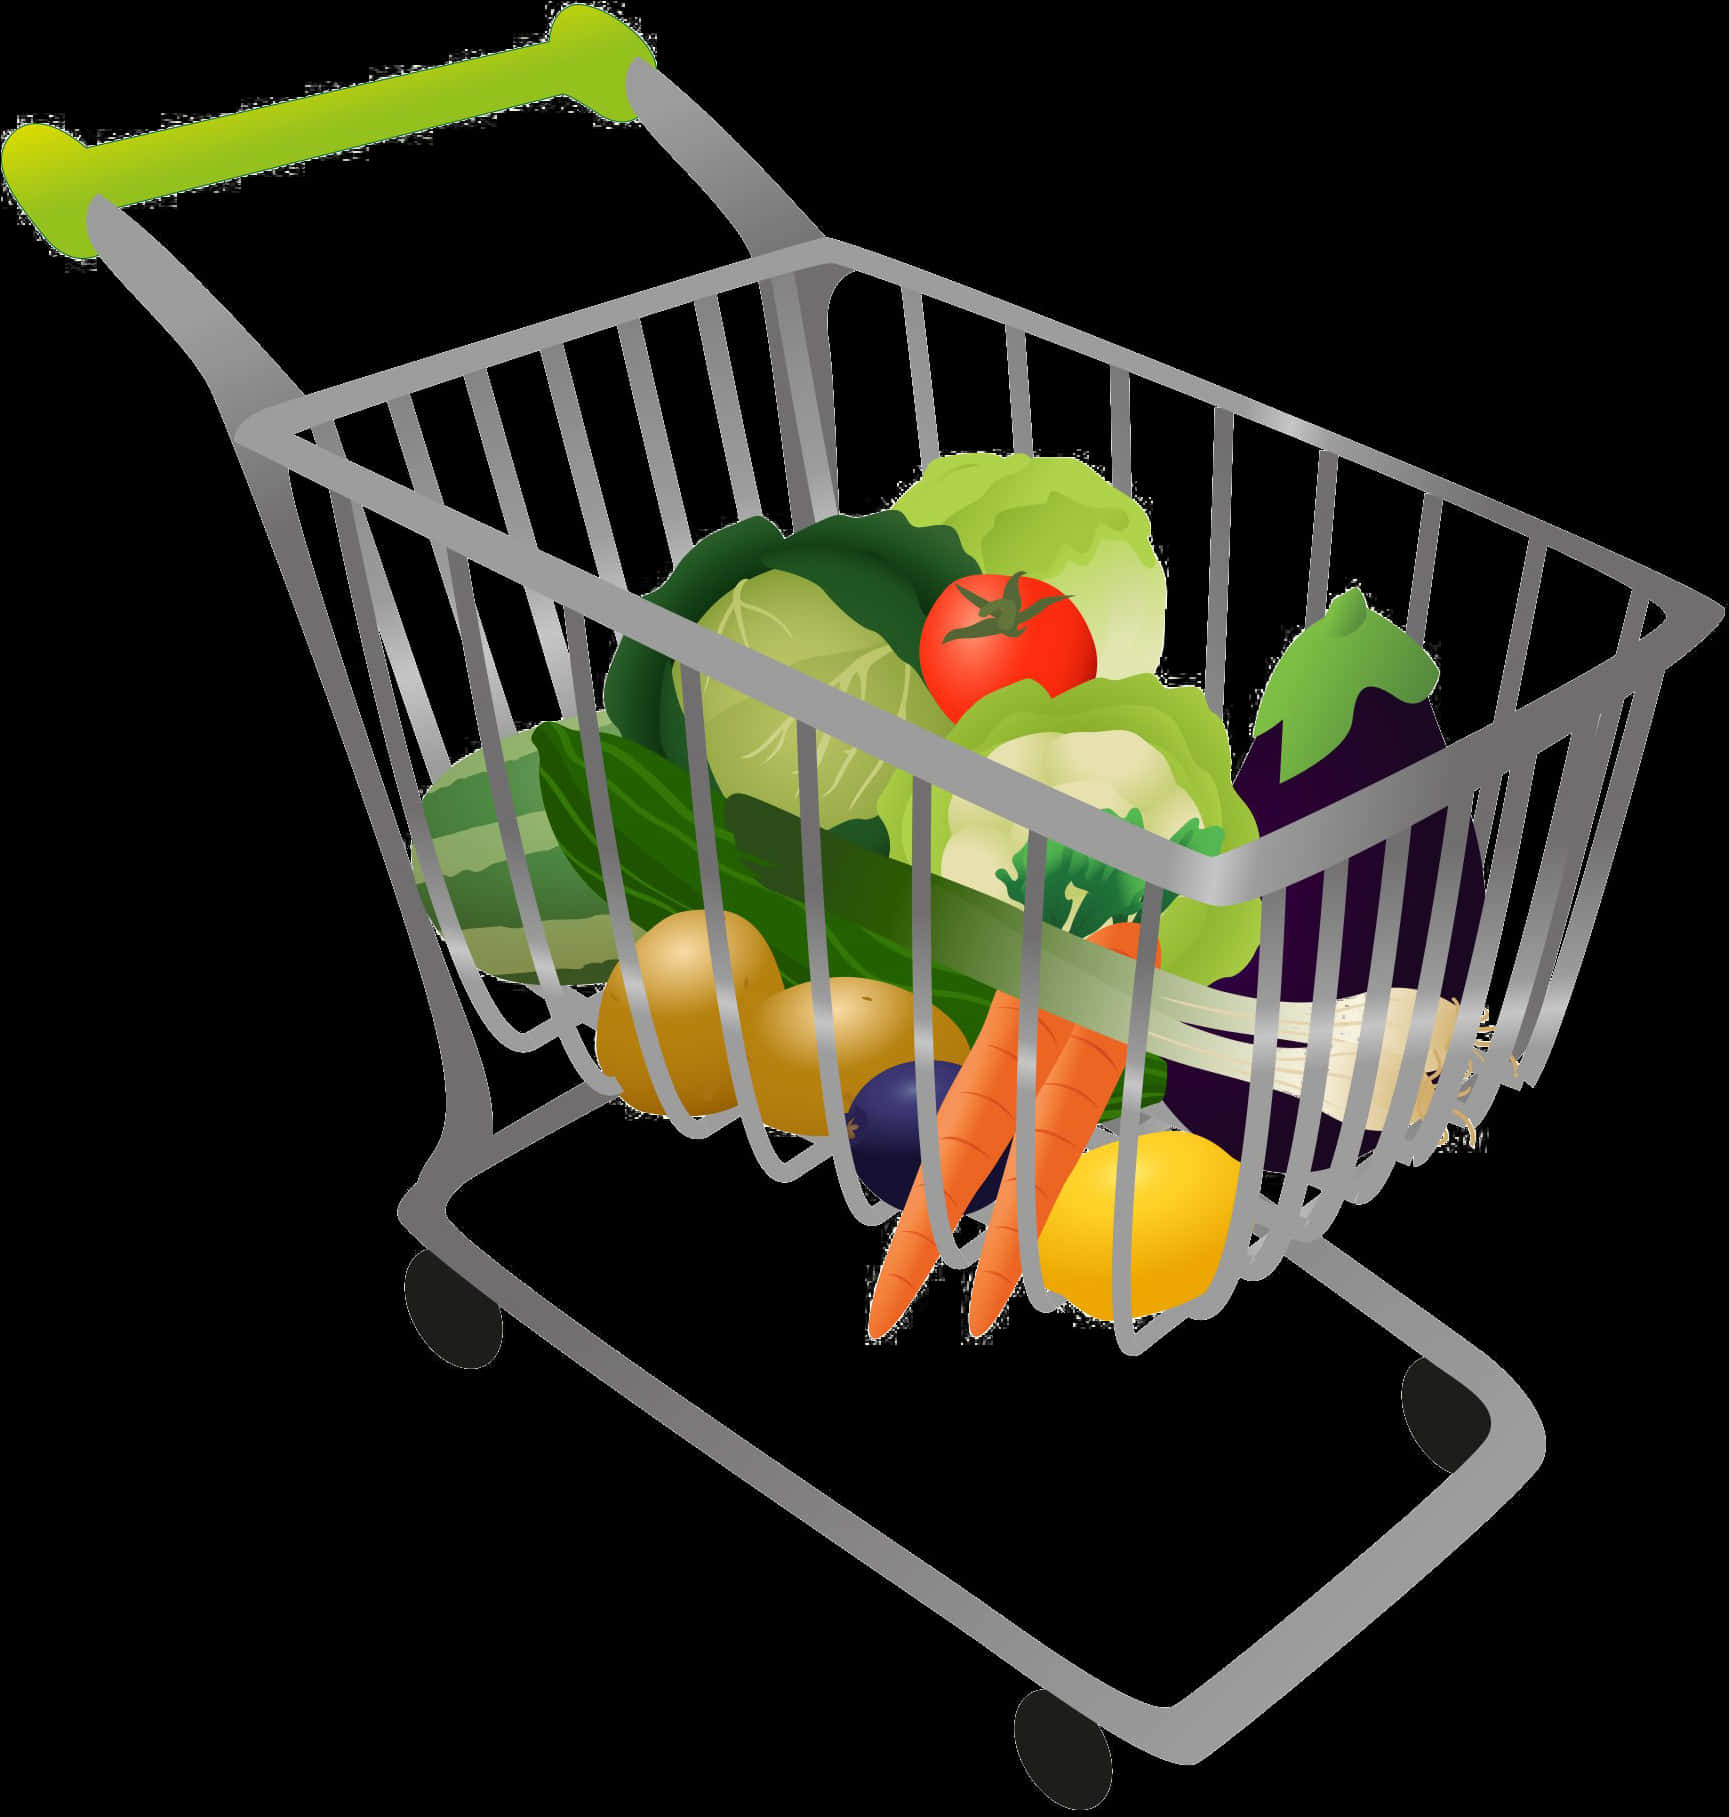 Colorful Grocery Shopping Cart PNG